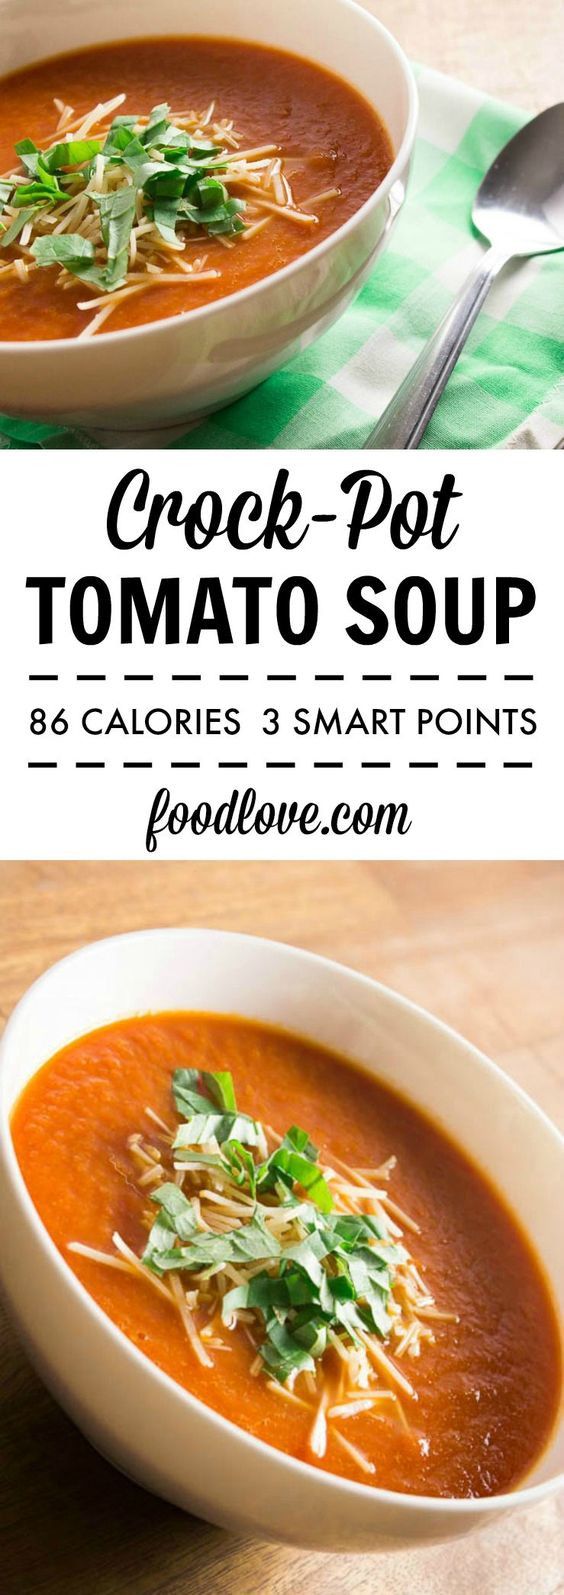 Low Calorie Soup Recipes
 Soups The doctor and Doctors on Pinterest